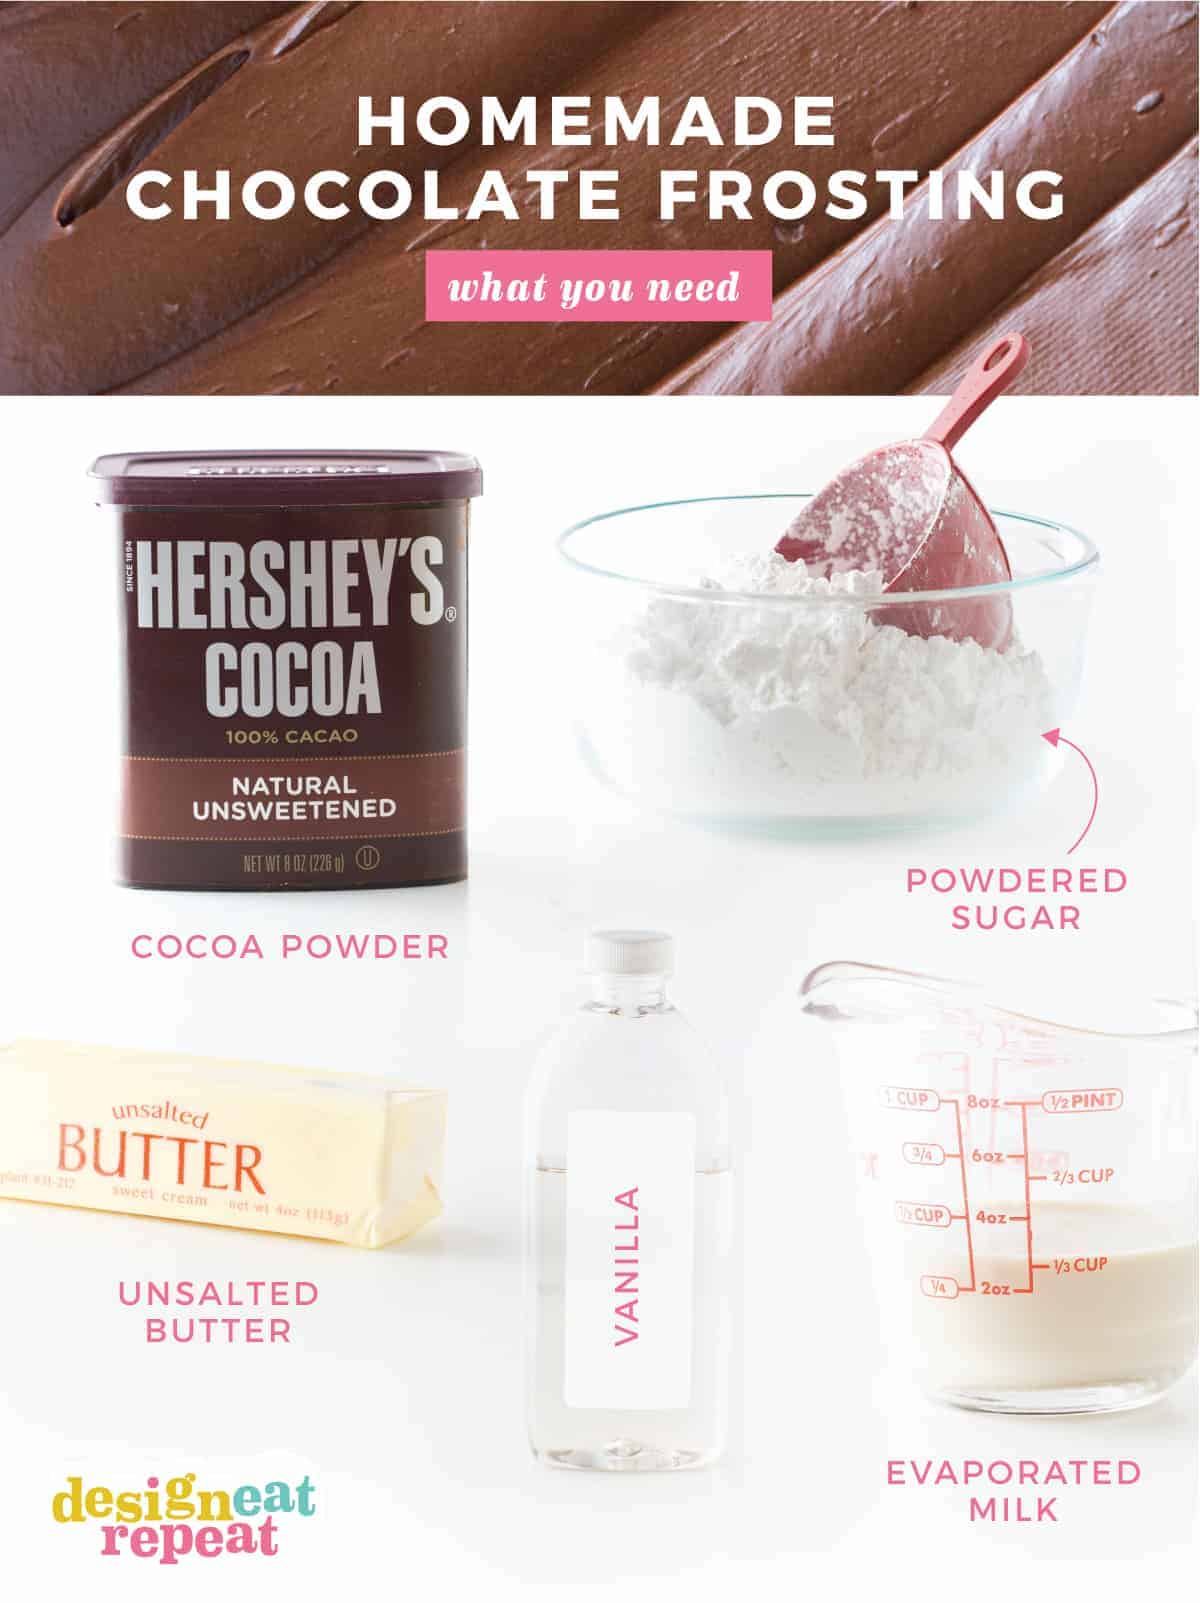 Ingredients to make a homemade, easy chocolate frosting using Hershey's unsweetened cocoa powder, powder sugar, butter, vanilla, and evaporated milk.